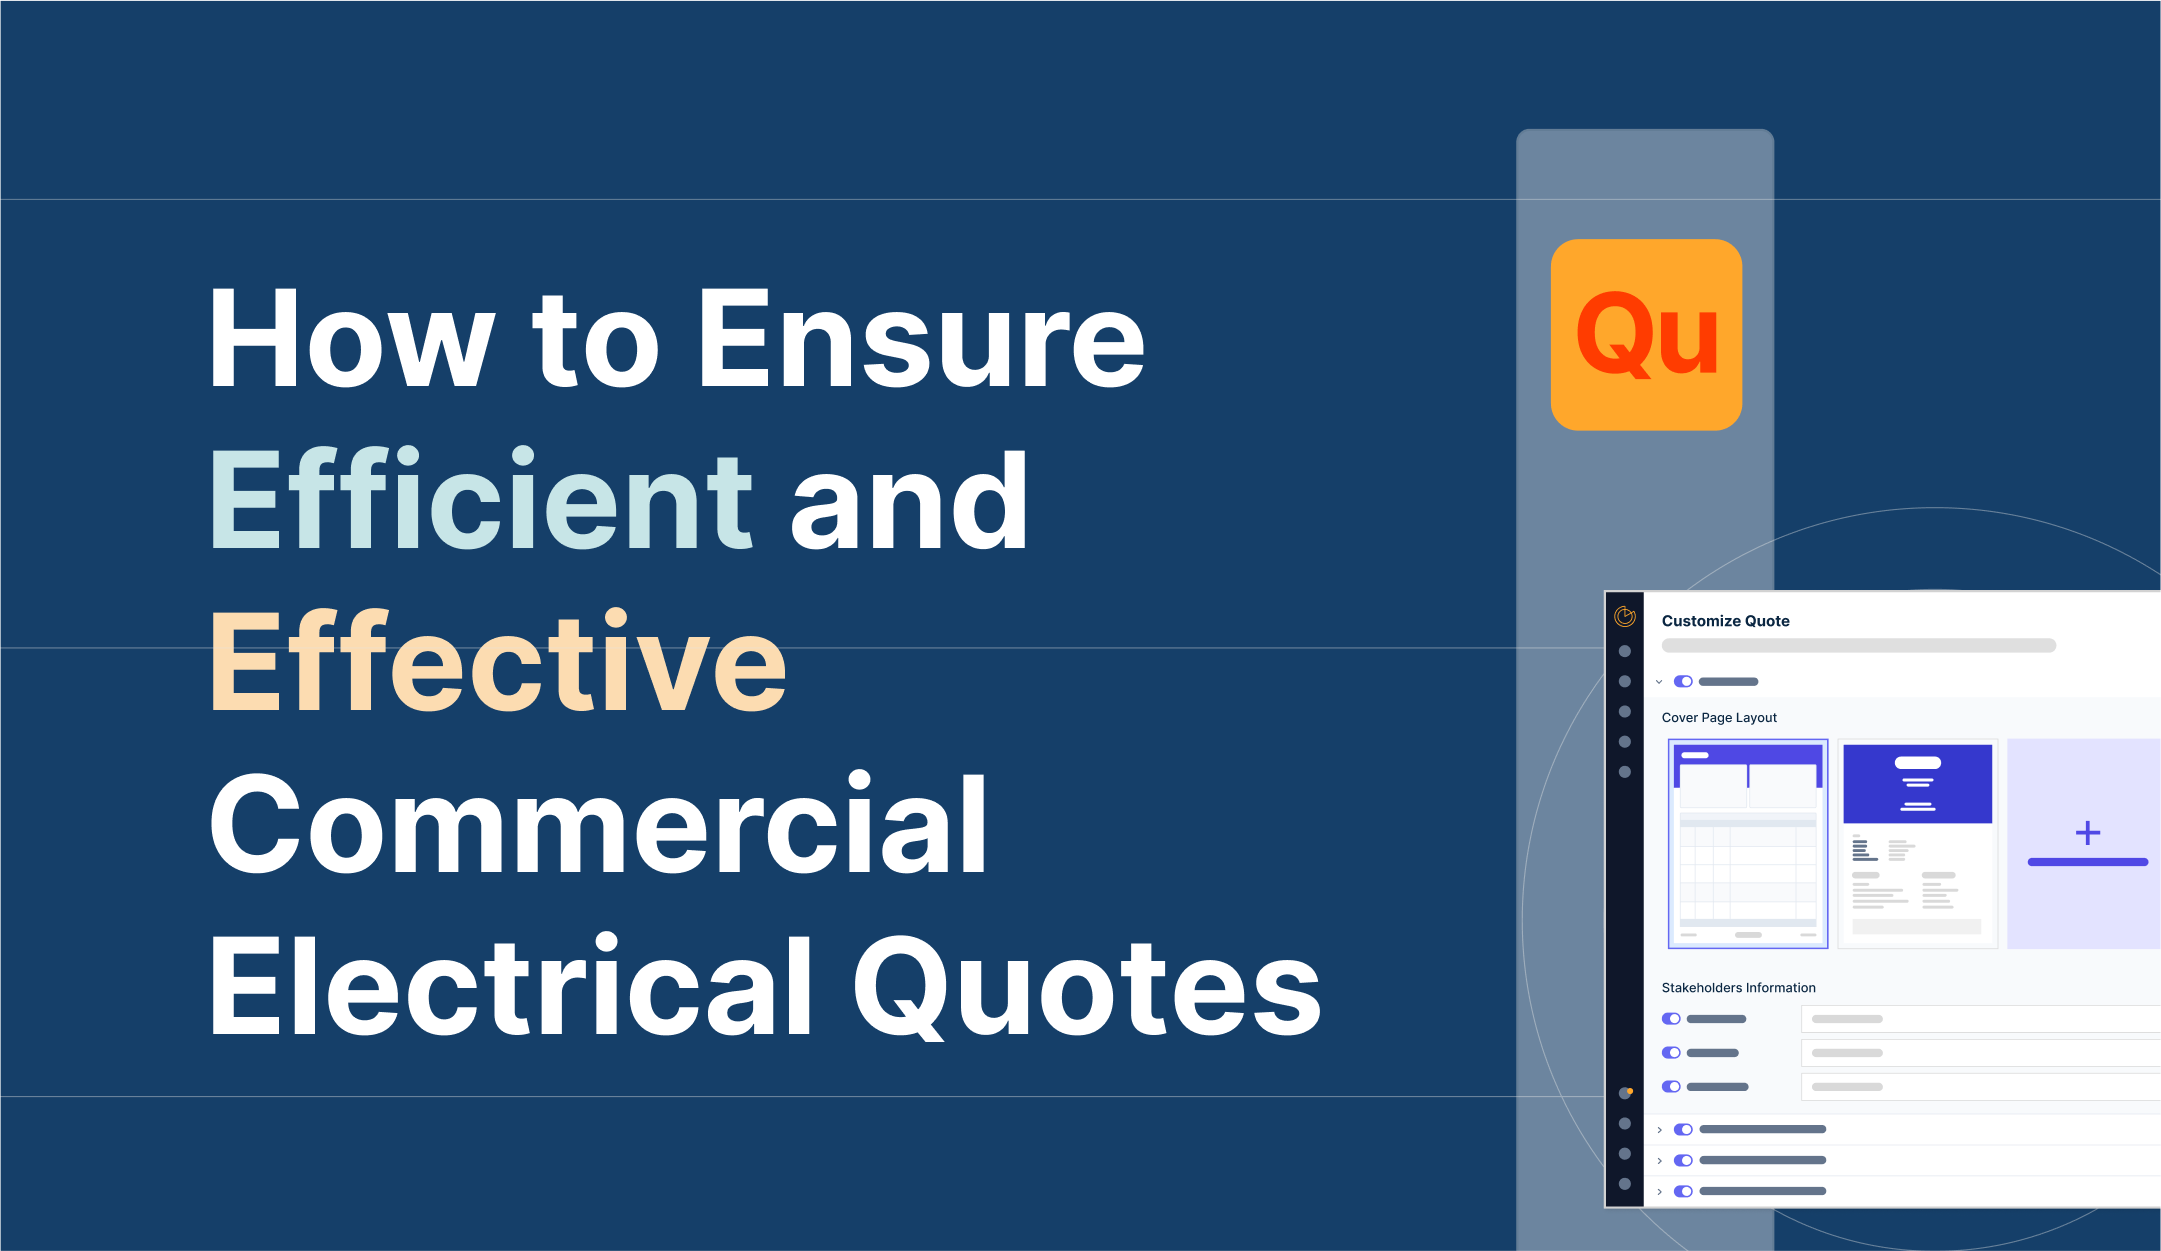 How to Ensure Efficient and Effective Commercial Electrical Quotes